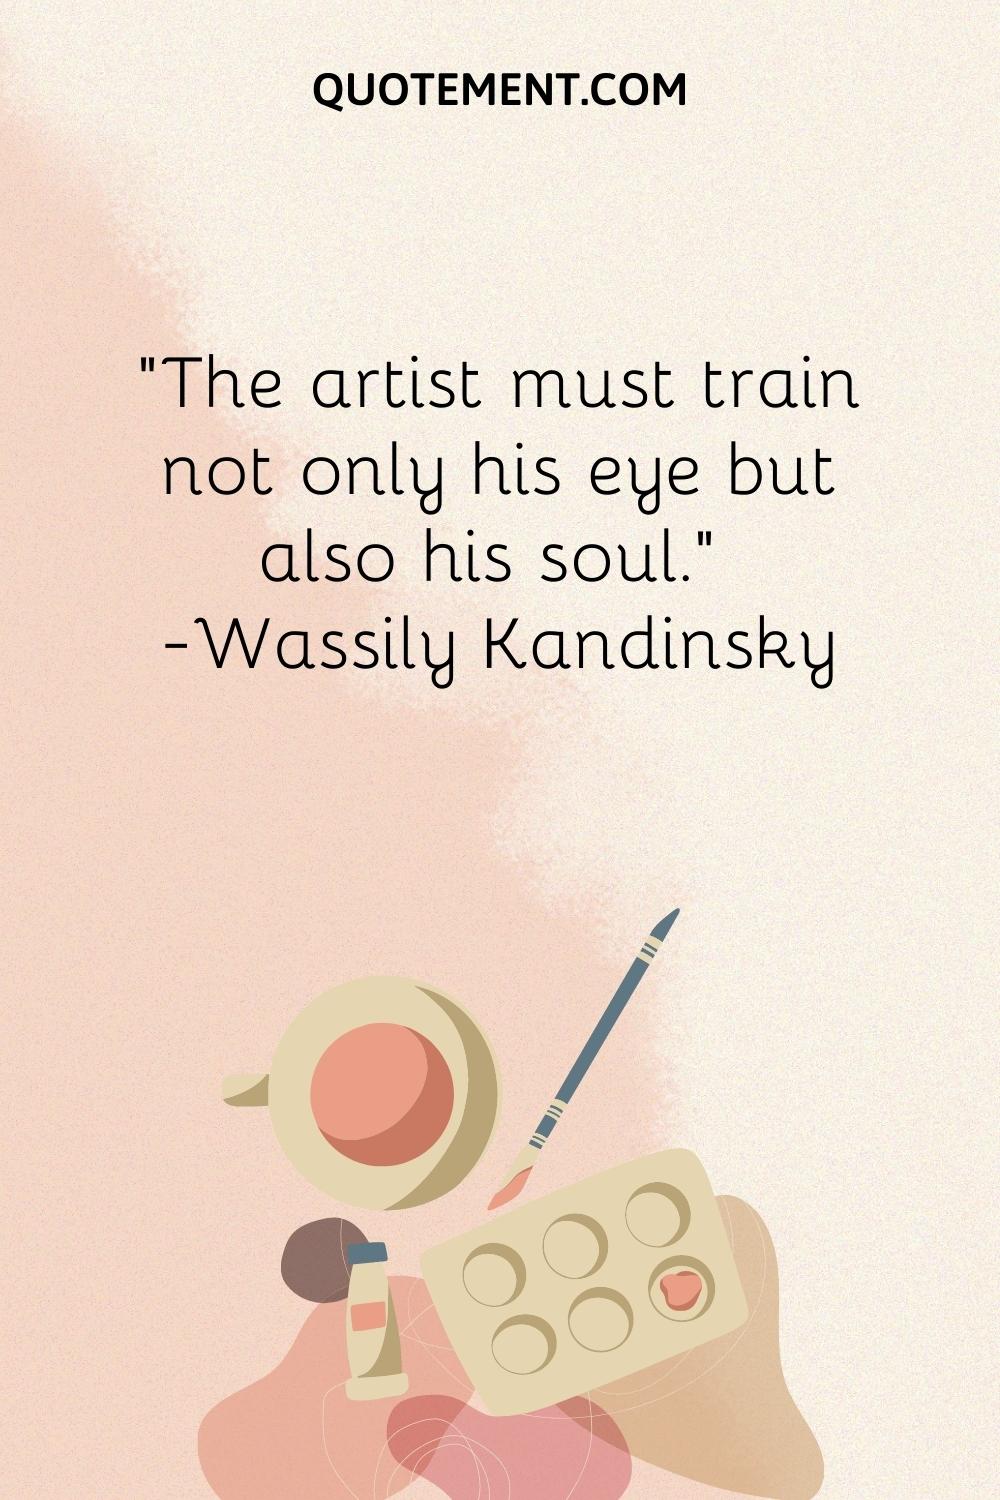 The artist must train not only his eye but also his soul